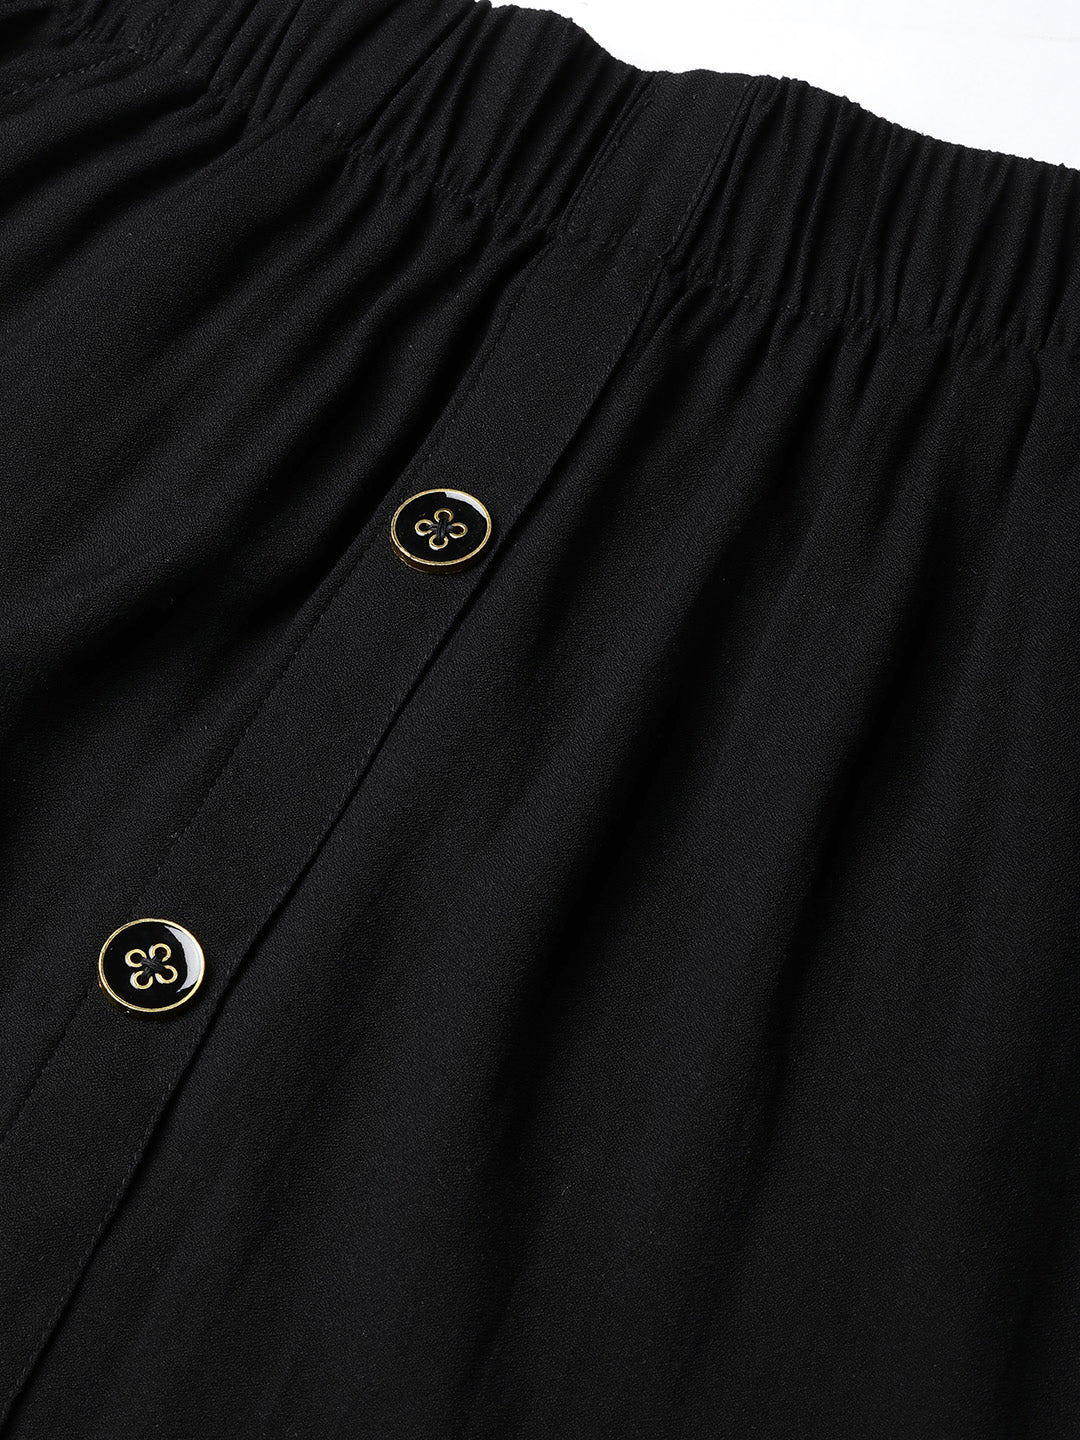 BLACK A LINE SKIRT WITH BUTTONS